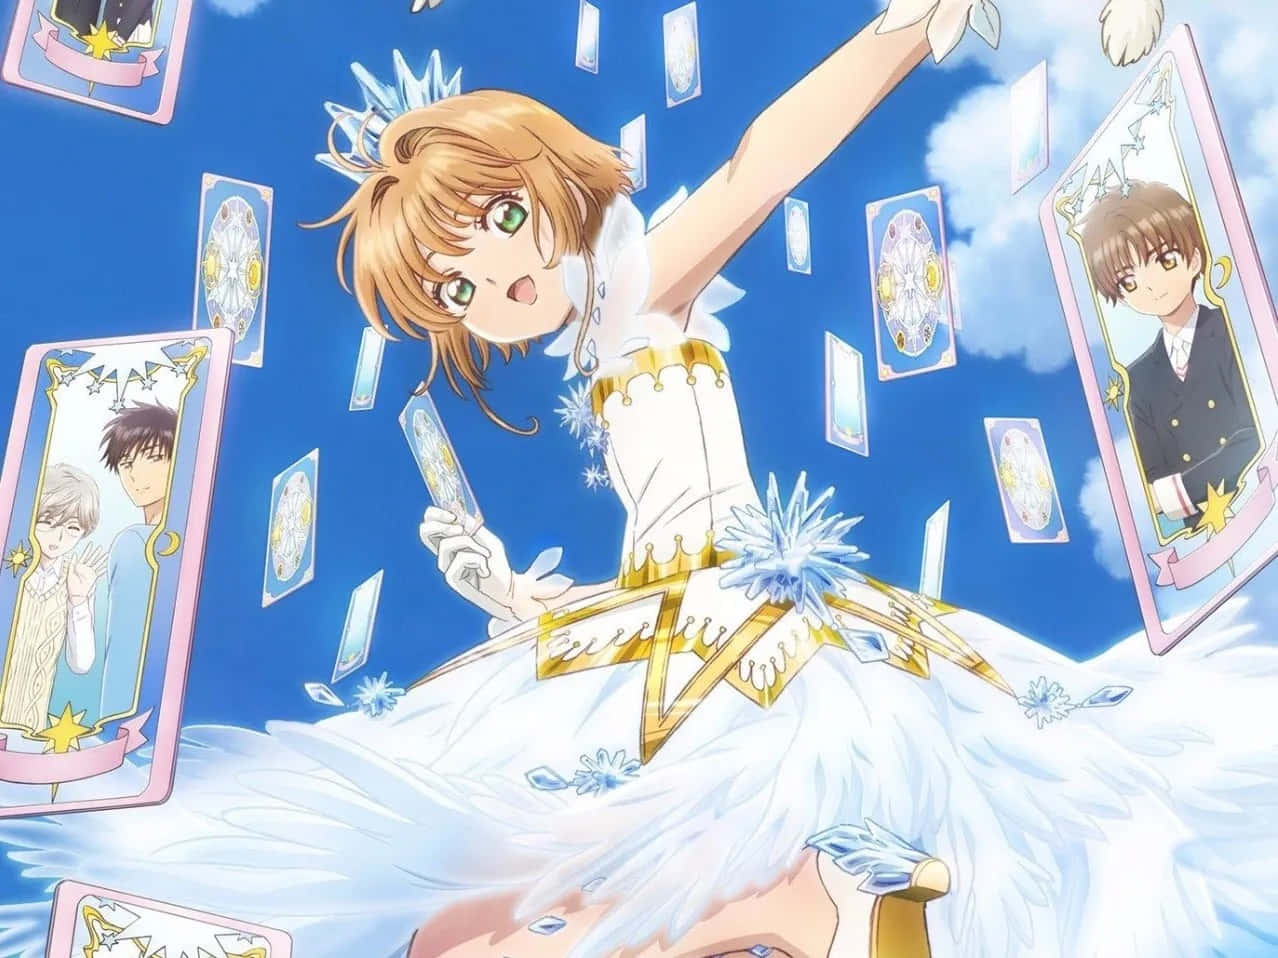 Armed with the magical Clow Cards, Cardcaptor Sakura stands ready to protect the world from the arcane.